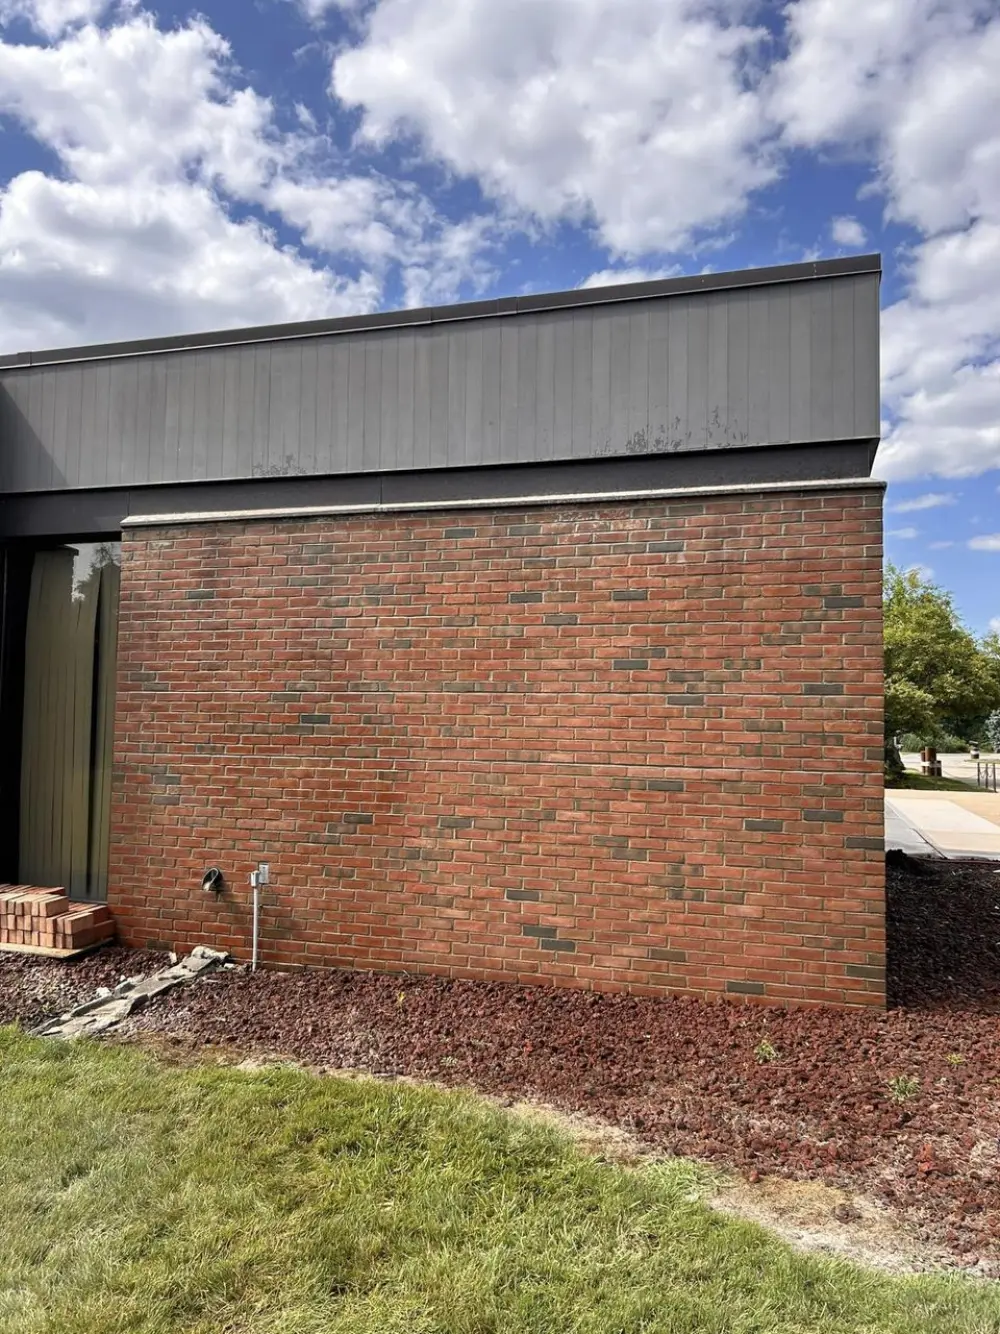 Tuckpointing not only enhances the aesthetic appeal but also provides structural benefits to the brick.